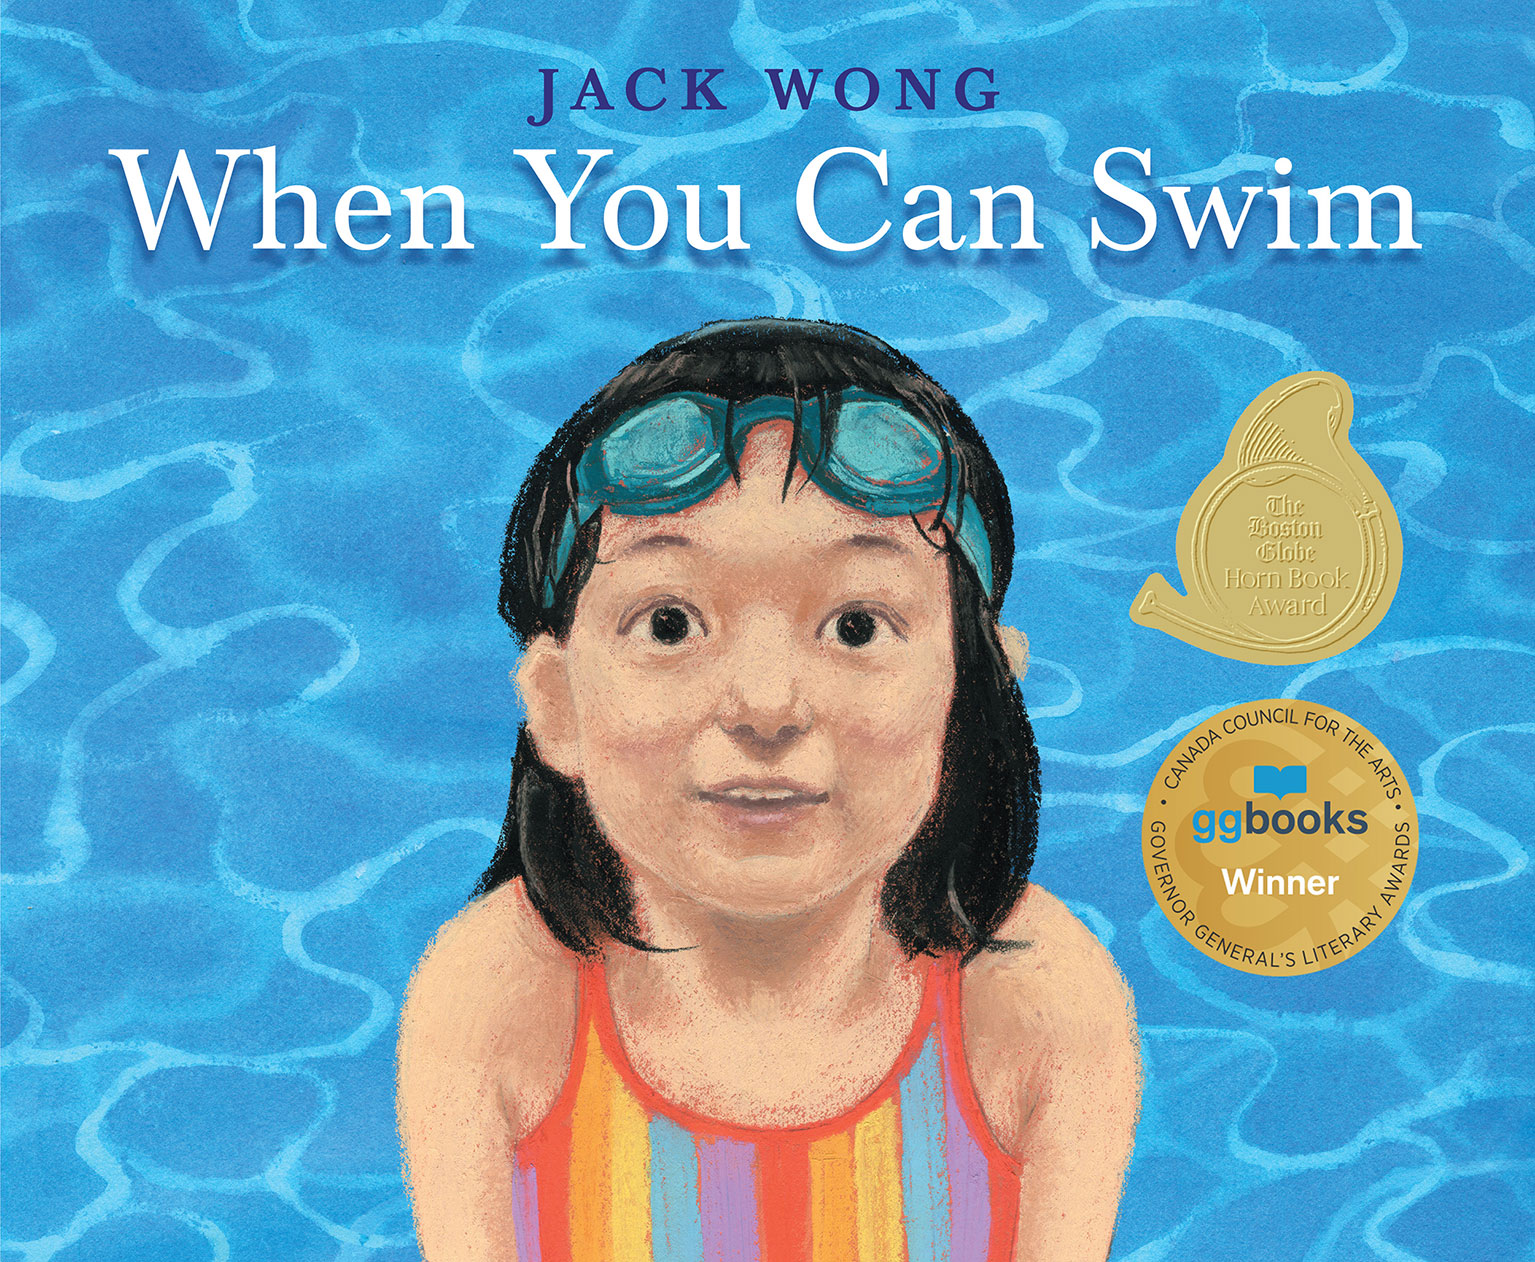 Cover of Jack Wong's book When You Can Swim.